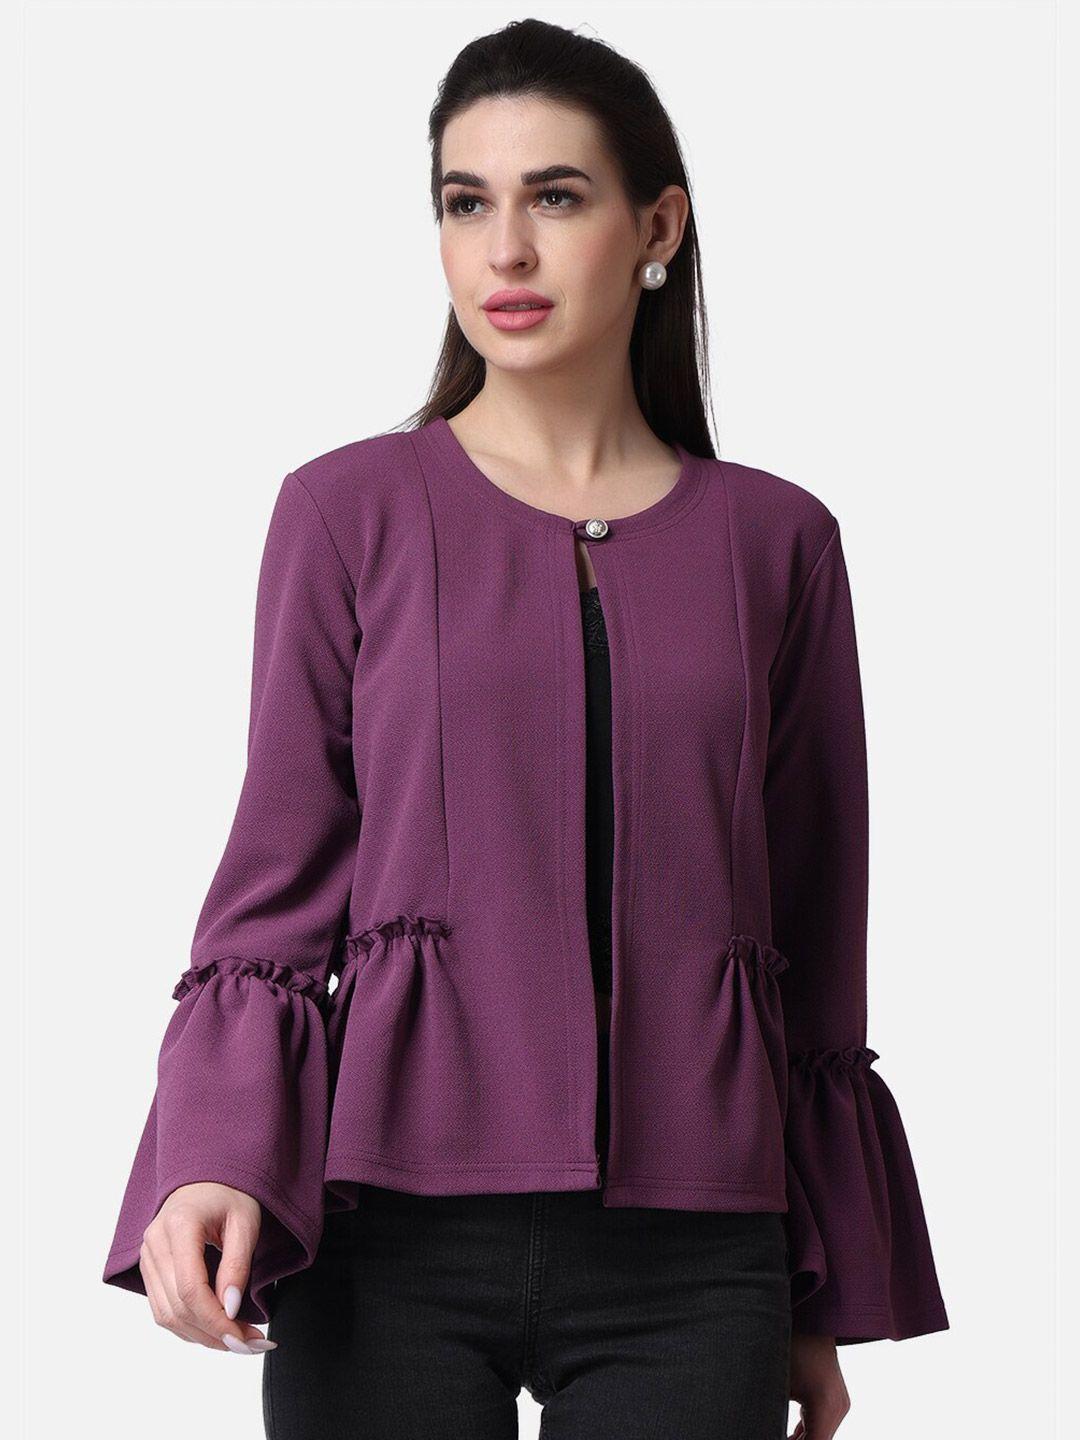 popwings-women-bell-sleeves-gathers-button-closure-shrug